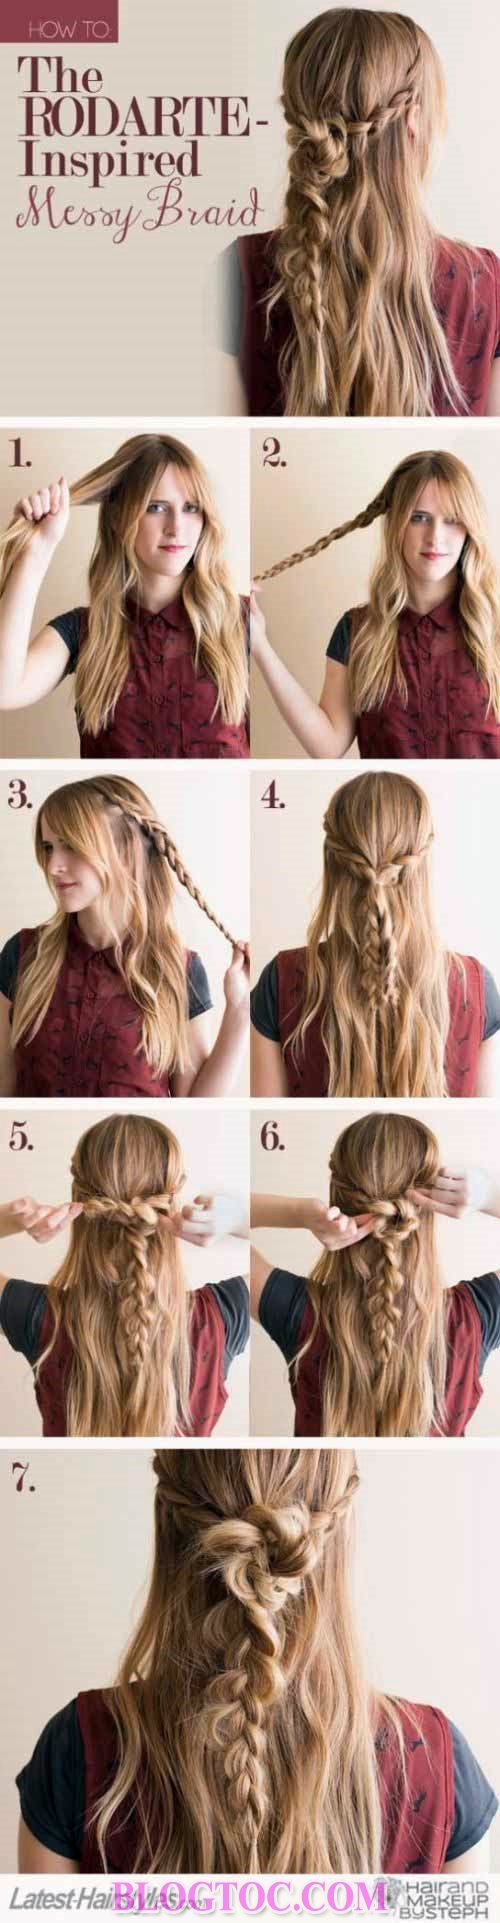 Beautiful hairstyles for the wedding party for your girlfriend to choose 2